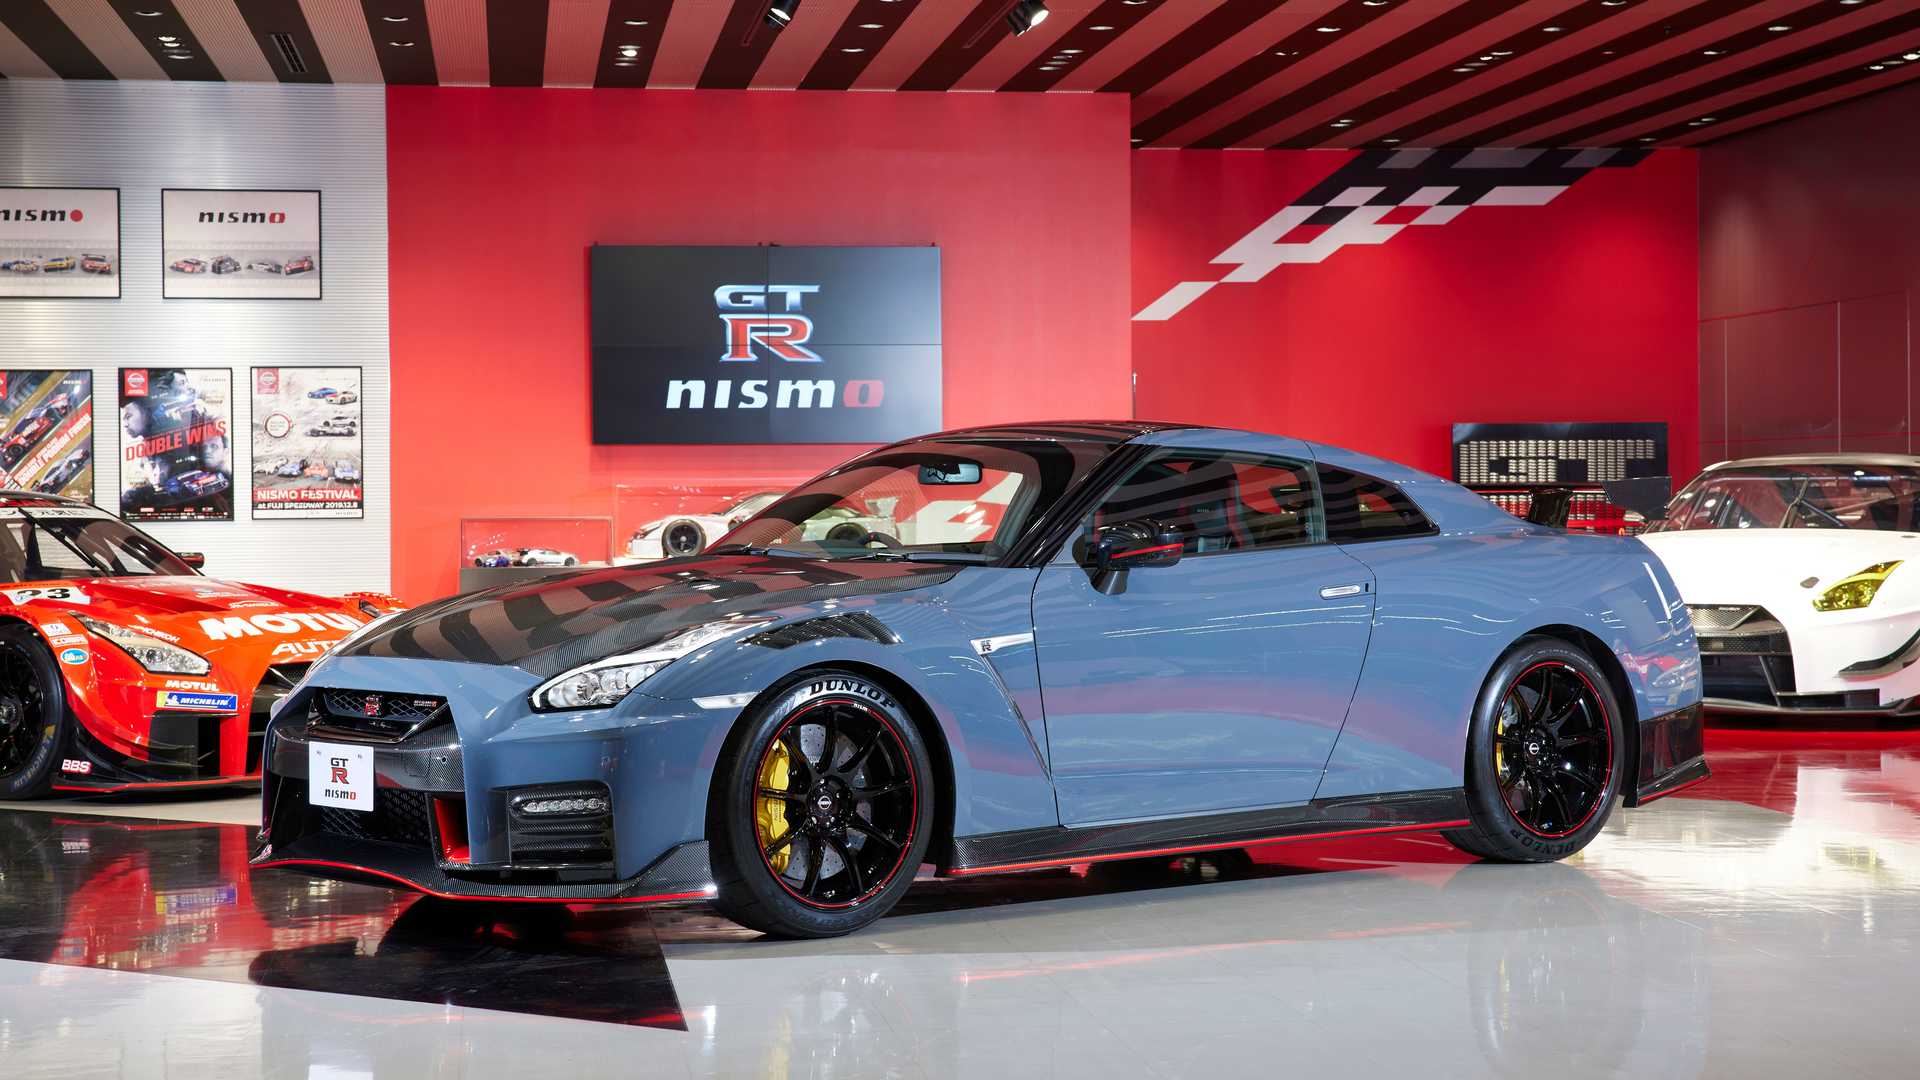 nissan-gtr-nismo-special-edition-cafeautovn-18